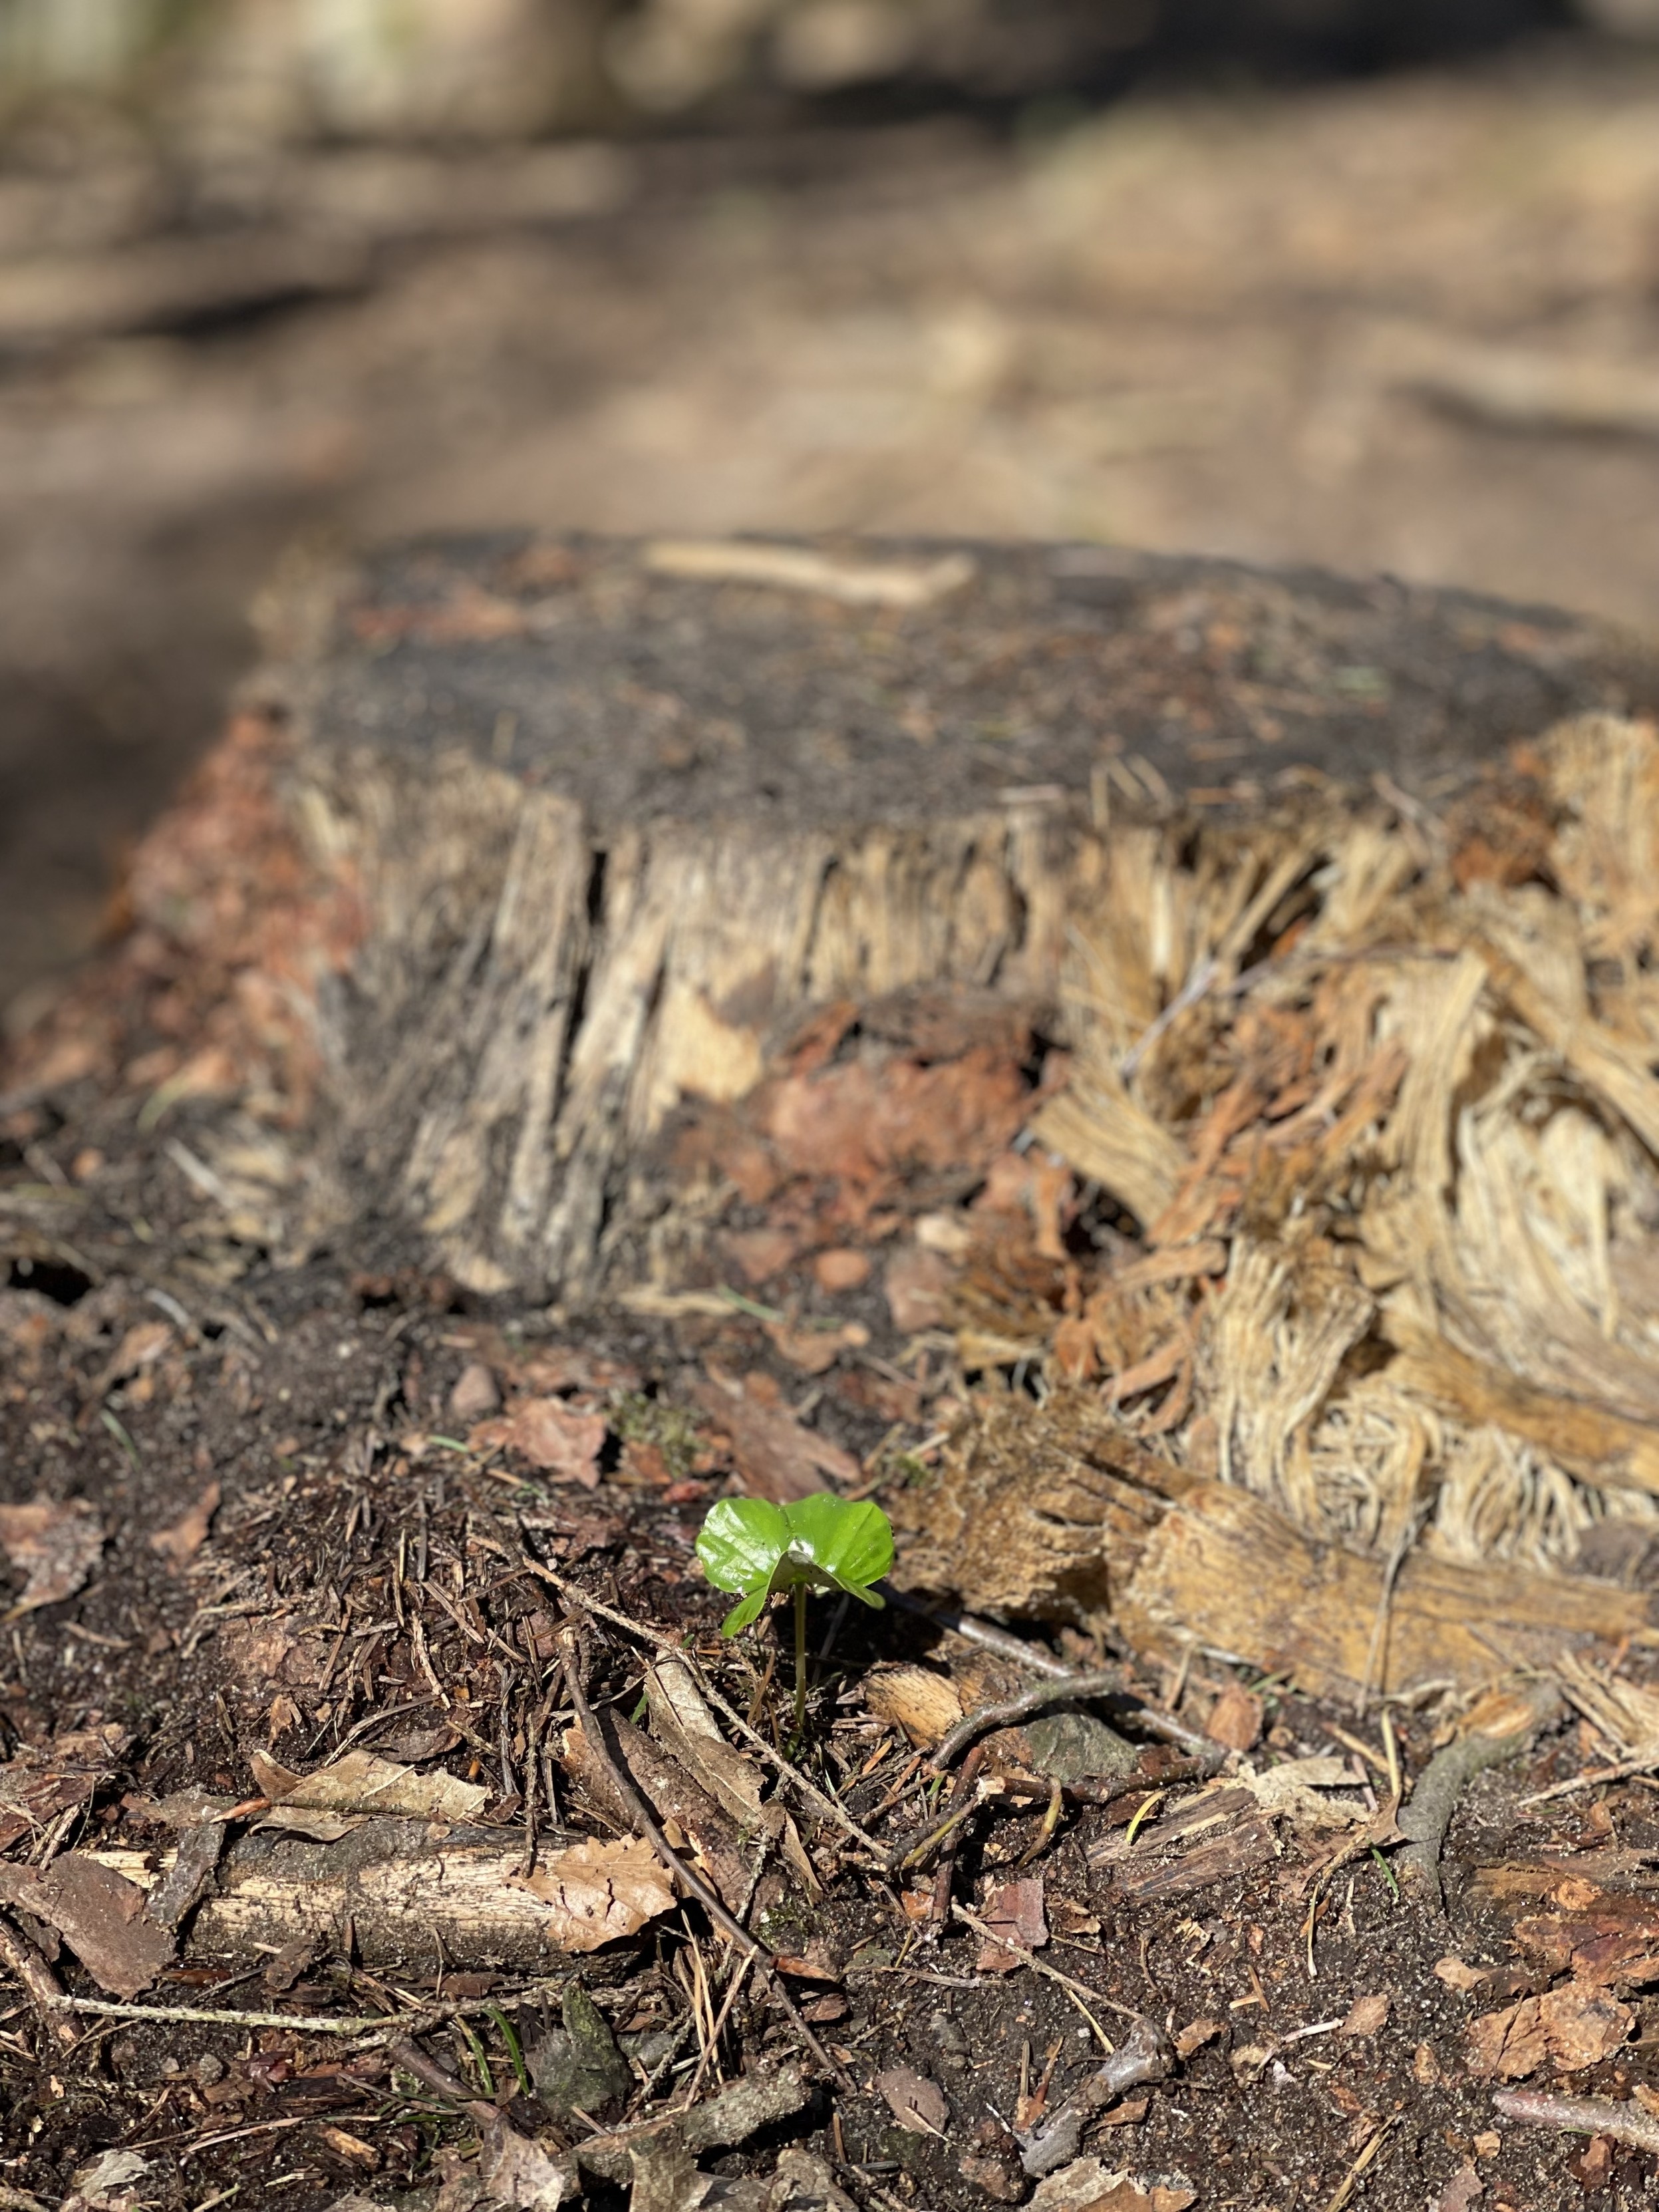 A small green plant sprouting next to a weathered tree stump with forest ground litter around.